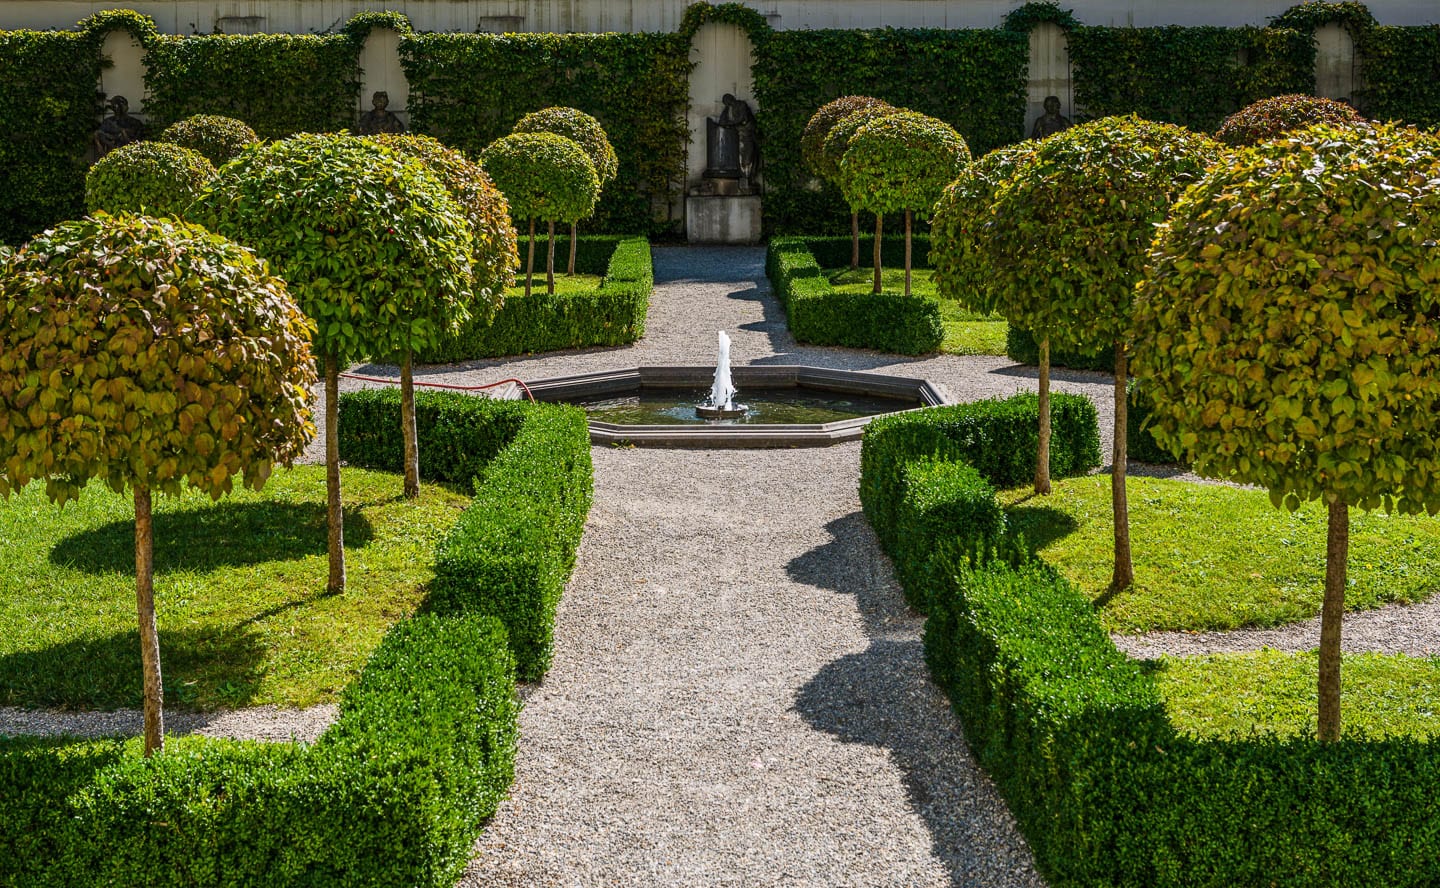 Traditional formal garden with a central path lined with clipped hedges and limbed up trees